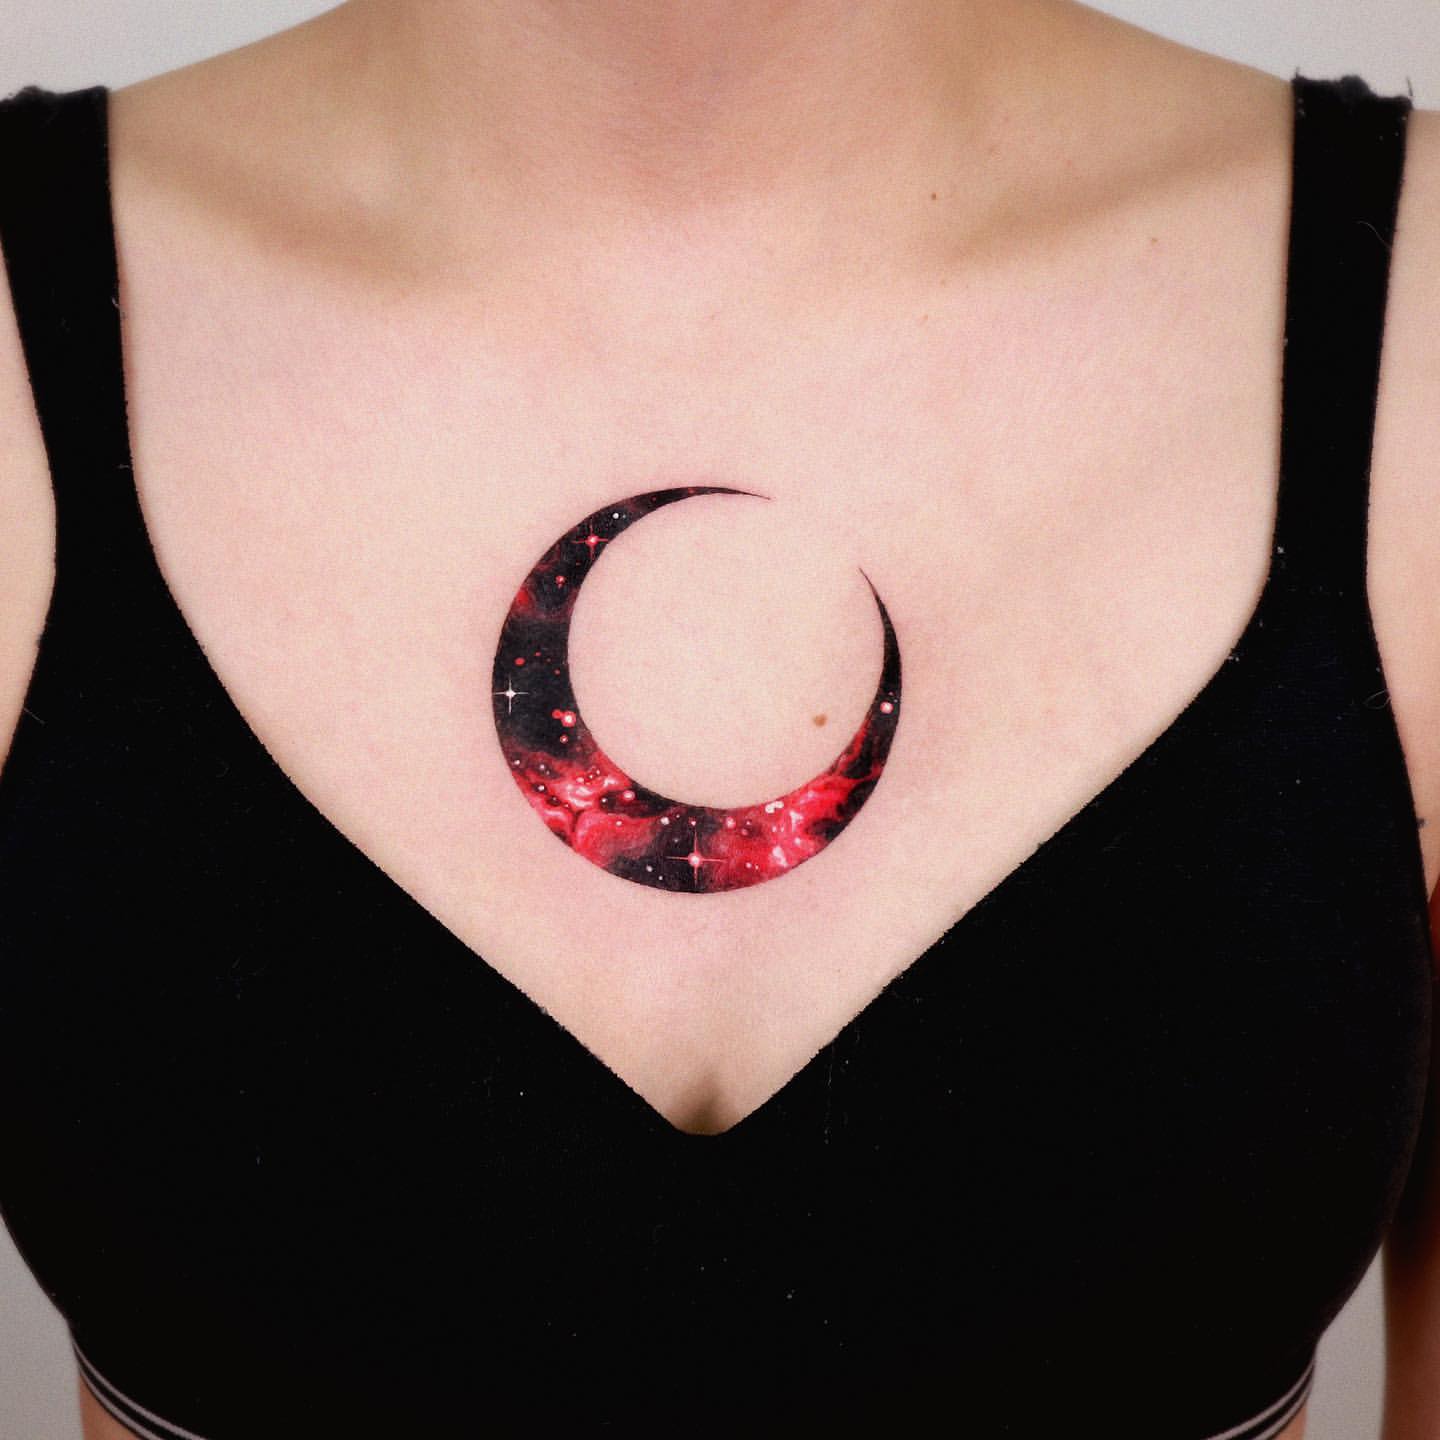 Chest Tattoos Ideas for Women 27